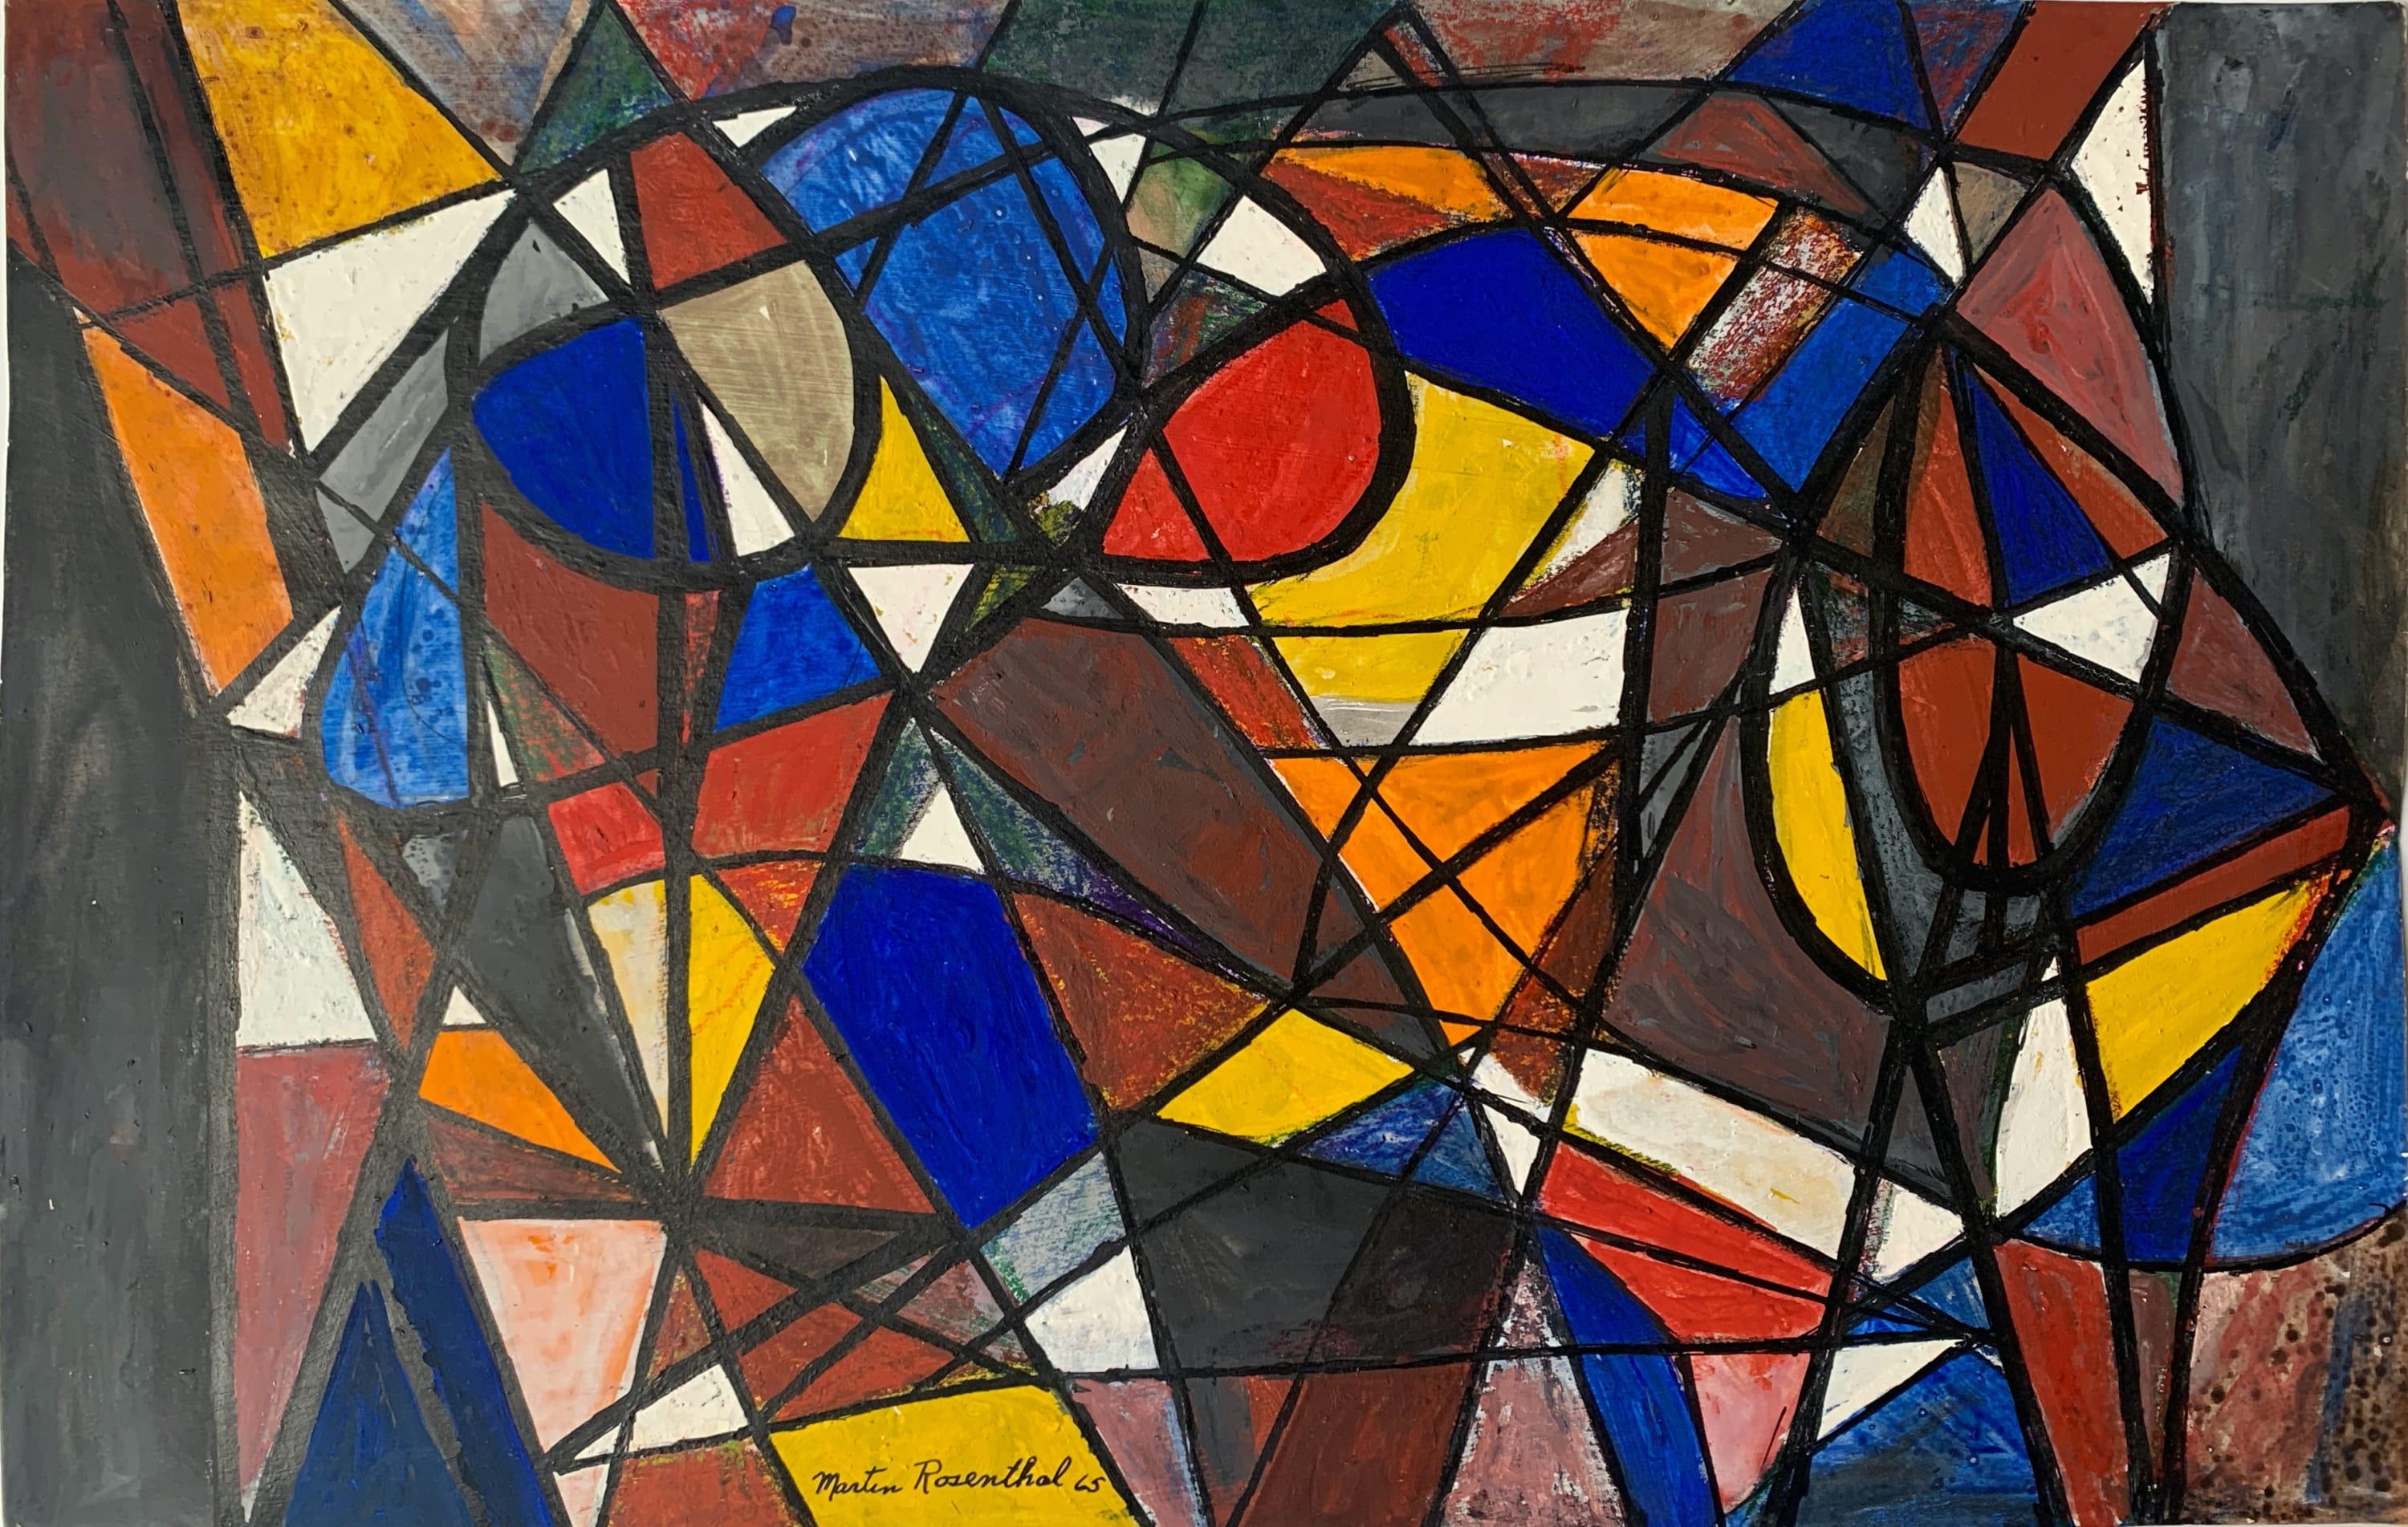 Abstract Painting Martin Rosenthal - Tableau abstrait Triangles and Semi Circles de 1965 en cobalt, rouge, jaune